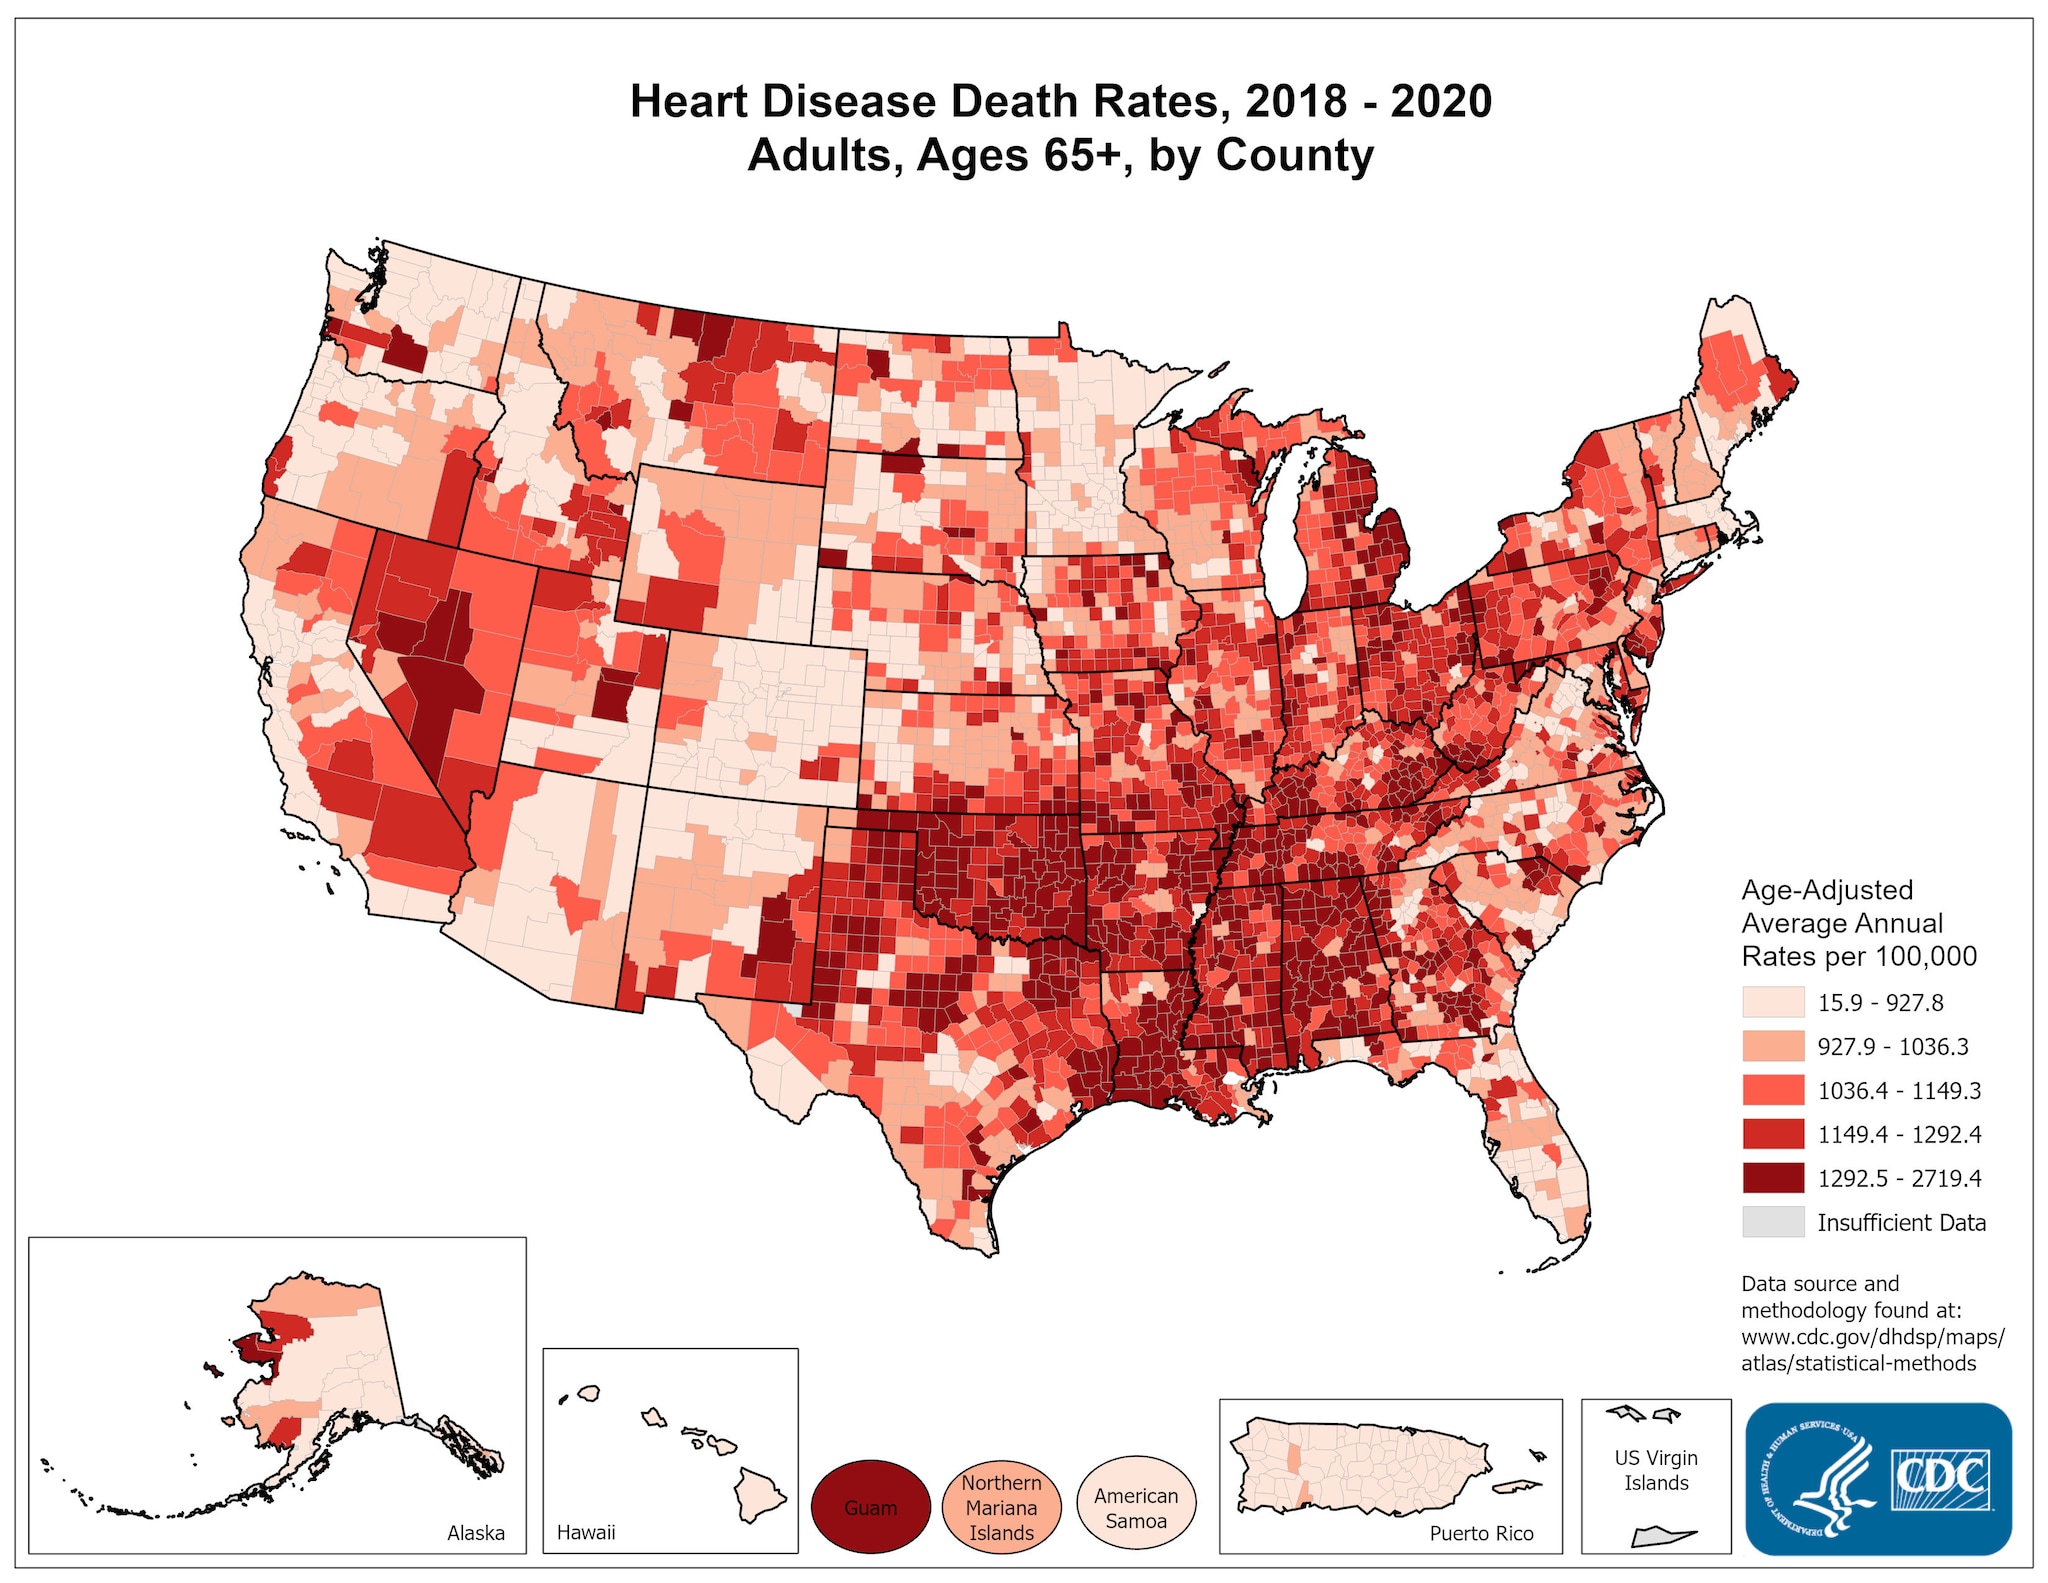 Heart Disease Death Rates for 2018 through 2020 for Adults Aged 65 Years and Older by County